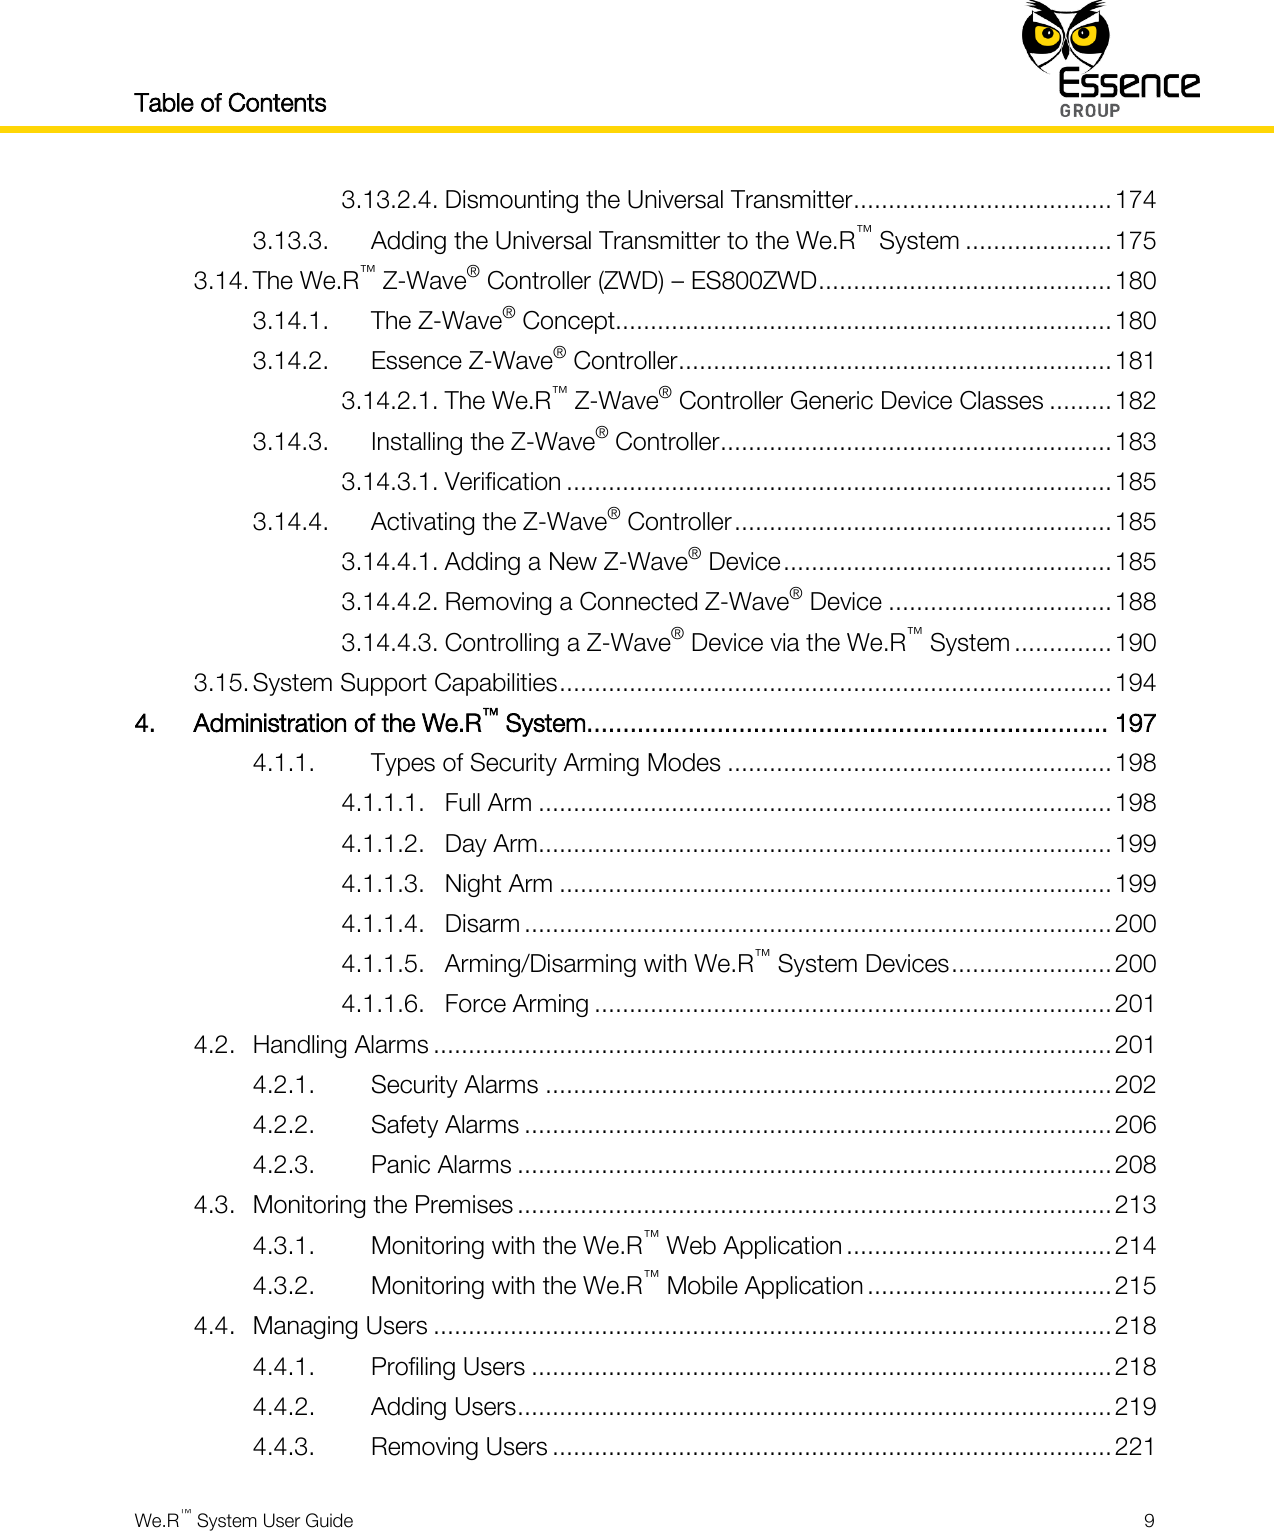 Table of Contents    We.R™ System User Guide  9  3.13.2.4. Dismounting the Universal Transmitter ..................................... 174 3.13.3. Adding the Universal Transmitter to the We.R™ System ..................... 175 3.14. The We.R™ Z-Wave® Controller (ZWD) – ES800ZWD .......................................... 180 3.14.1. The Z-Wave® Concept....................................................................... 180 3.14.2. Essence Z-Wave® Controller .............................................................. 181 3.14.2.1. The We.R™ Z-Wave® Controller Generic Device Classes ......... 182 3.14.3. Installing the Z-Wave® Controller ........................................................ 183 3.14.3.1. Verification .............................................................................. 185 3.14.4. Activating the Z-Wave® Controller ...................................................... 185 3.14.4.1. Adding a New Z-Wave® Device ............................................... 185 3.14.4.2. Removing a Connected Z-Wave® Device ................................ 188 3.14.4.3. Controlling a Z-Wave® Device via the We.R™ System .............. 190 3.15. System Support Capabilities ............................................................................... 194 4. Administration of the We.R™ System........................................................................ 197 4.1.1. Types of Security Arming Modes ....................................................... 198 4.1.1.1. Full Arm .................................................................................. 198 4.1.1.2. Day Arm .................................................................................. 199 4.1.1.3. Night Arm ............................................................................... 199 4.1.1.4. Disarm .................................................................................... 200 4.1.1.5. Arming/Disarming with We.R™ System Devices ....................... 200 4.1.1.6. Force Arming .......................................................................... 201 4.2. Handling Alarms ................................................................................................. 201 4.2.1. Security Alarms ................................................................................. 202 4.2.2. Safety Alarms .................................................................................... 206 4.2.3. Panic Alarms ..................................................................................... 208 4.3. Monitoring the Premises ..................................................................................... 213 4.3.1. Monitoring with the We.R™ Web Application ...................................... 214 4.3.2. Monitoring with the We.R™ Mobile Application ................................... 215 4.4. Managing Users ................................................................................................. 218 4.4.1. Profiling Users ................................................................................... 218 4.4.2. Adding Users ..................................................................................... 219 4.4.3. Removing Users ................................................................................ 221 